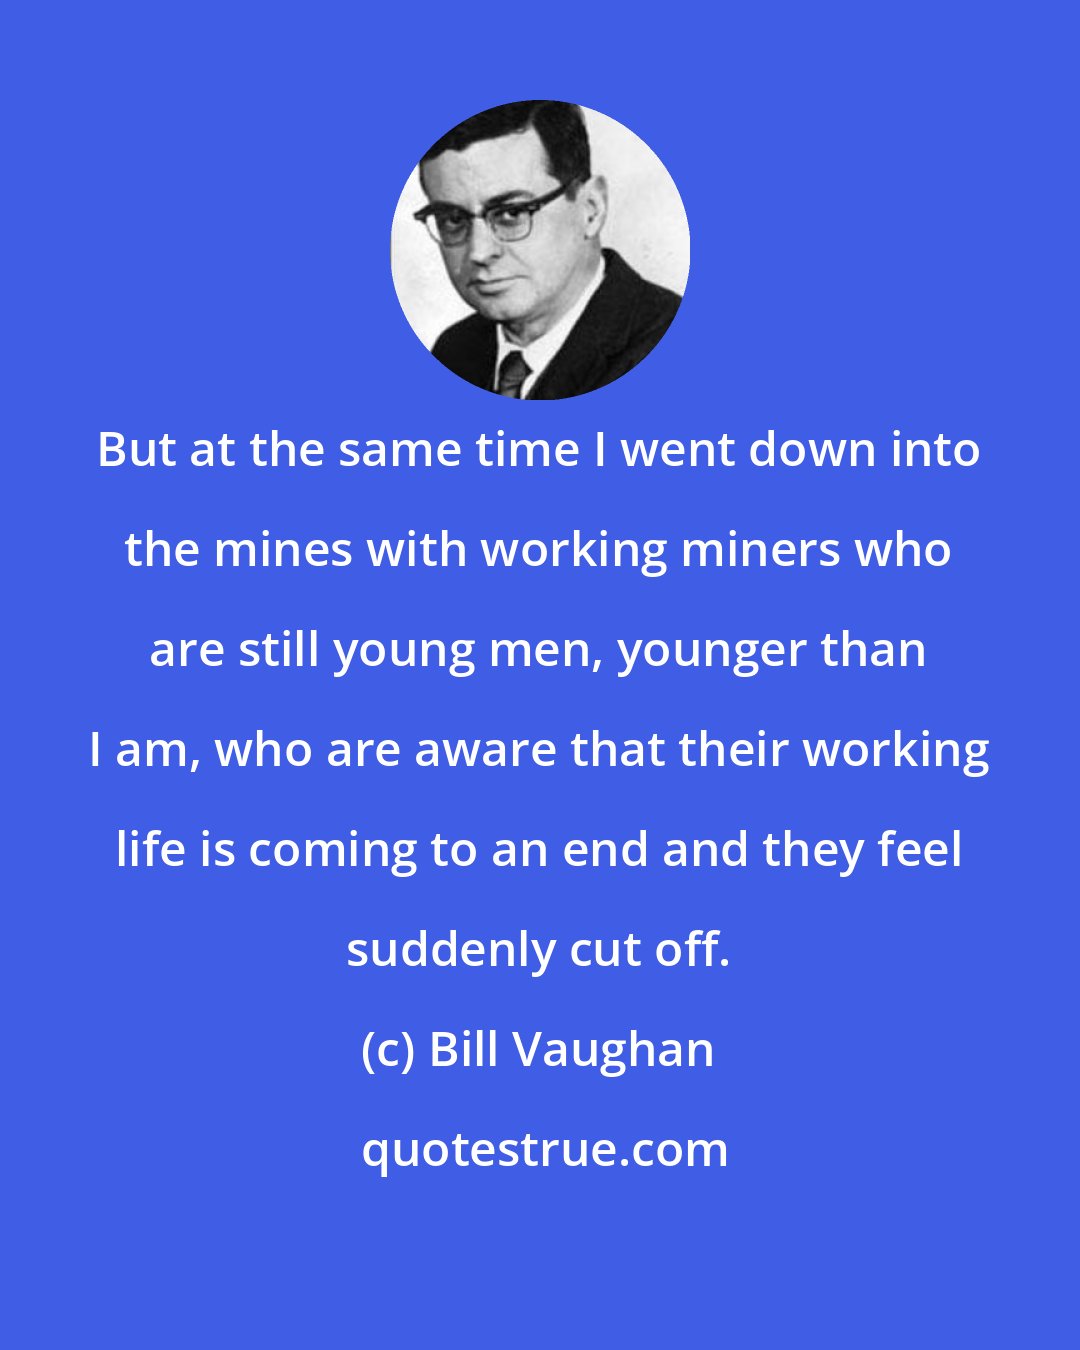 Bill Vaughan: But at the same time I went down into the mines with working miners who are still young men, younger than I am, who are aware that their working life is coming to an end and they feel suddenly cut off.